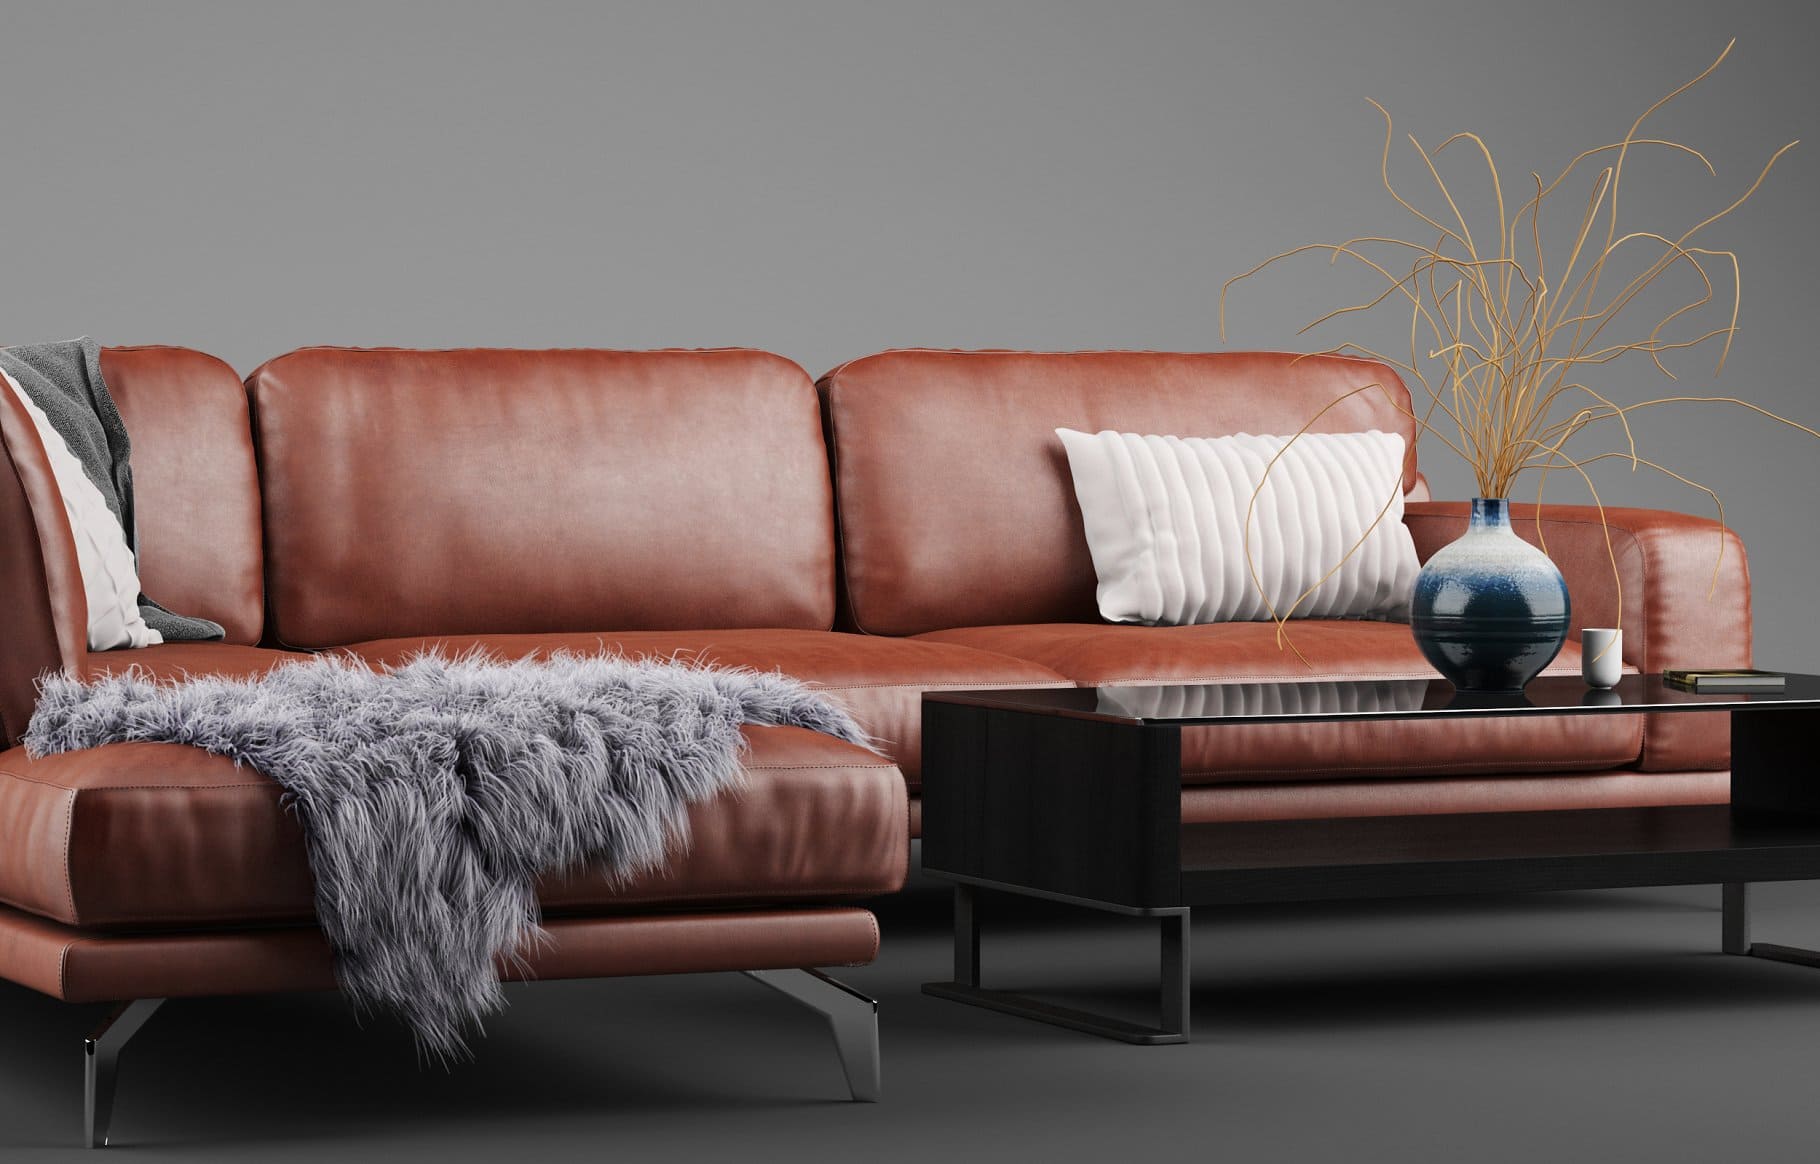 A wool blanket lies on the Peruna Leather Modular Sectional SOF.